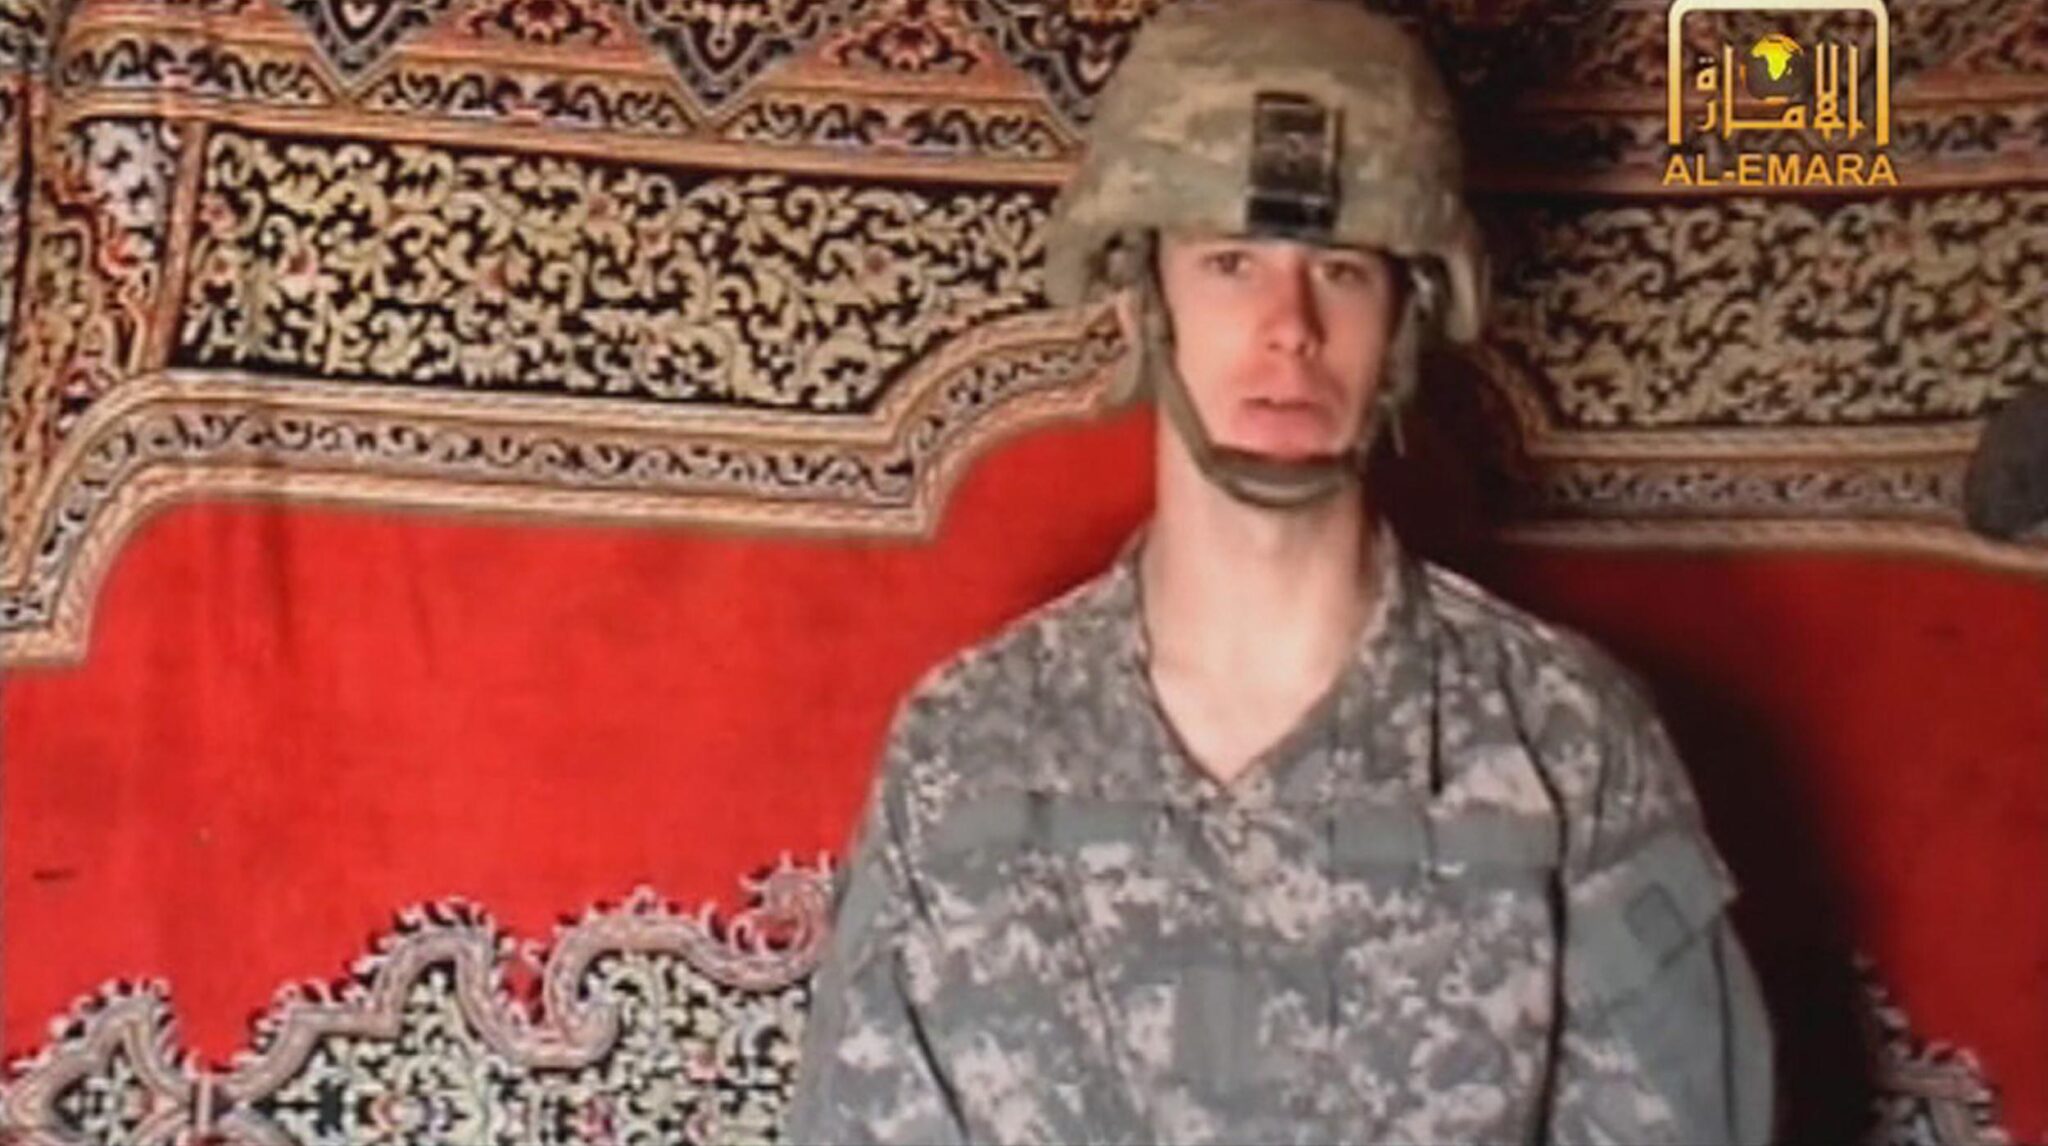 Army Sgt Bowe Bergdahl For Five High Level Taliban Prisoners In Guantanamo Bay Trade The